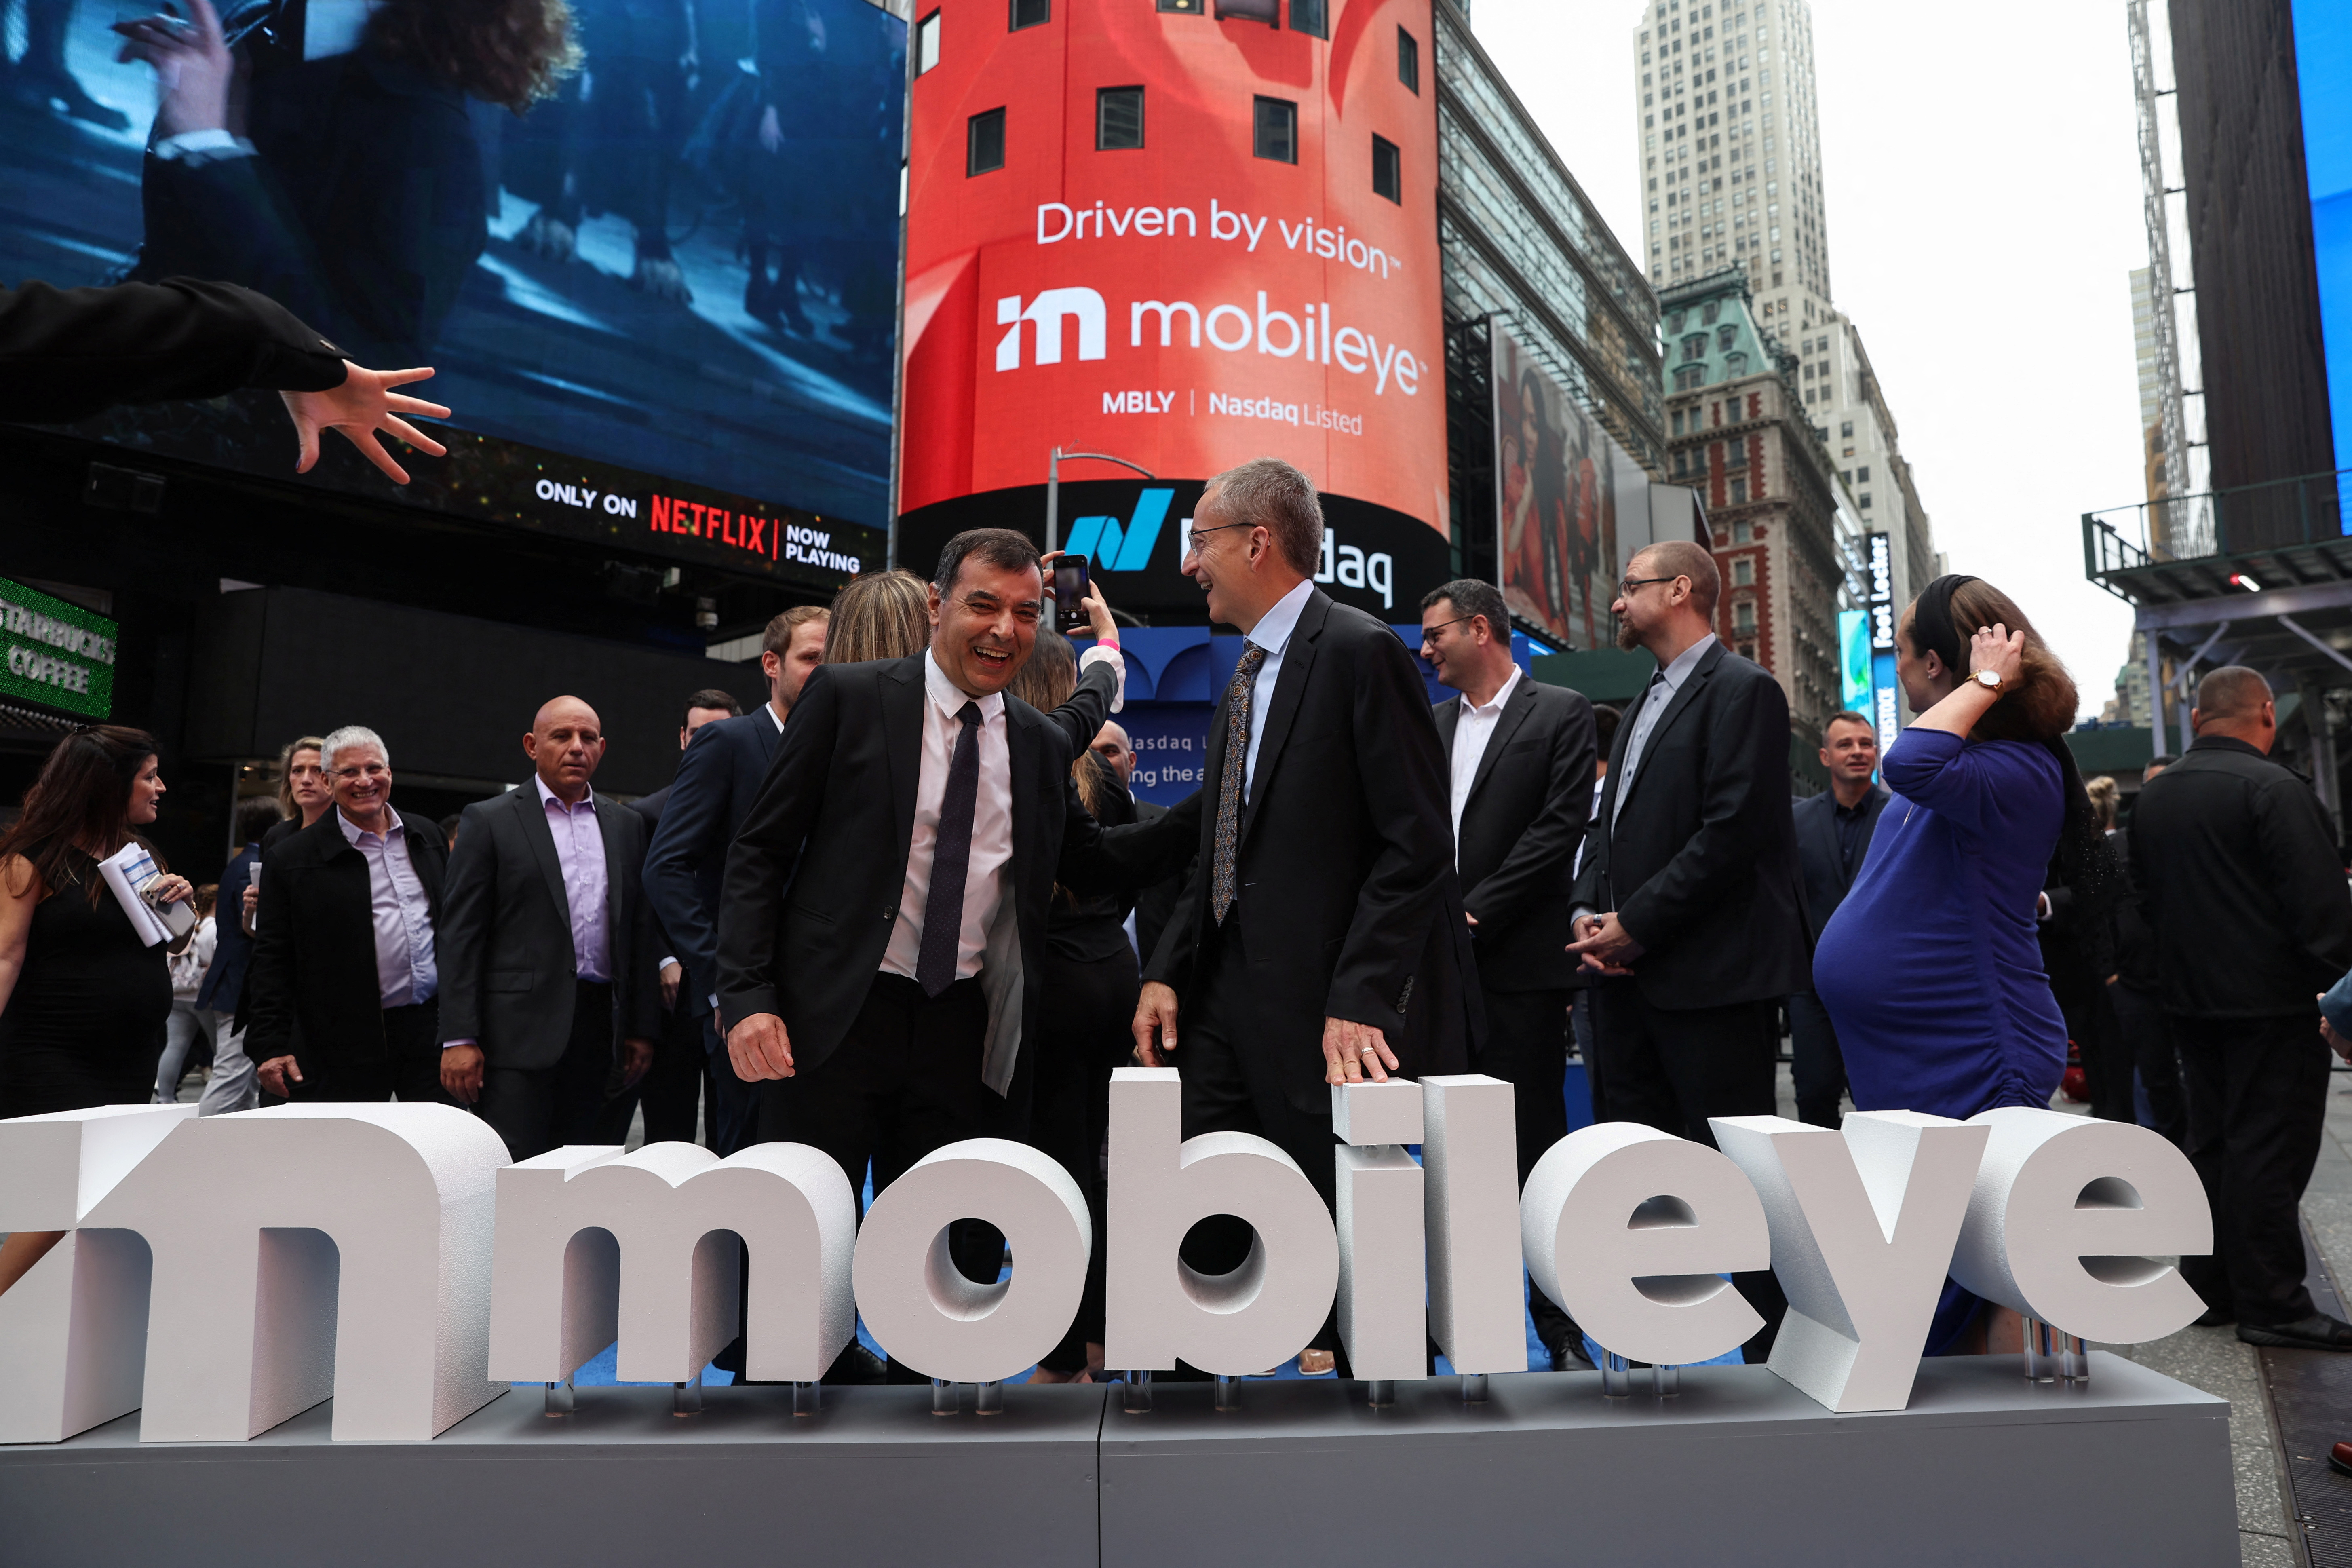 Professor Amnon Shashua and Pat Gelsinger celebrate after ringing the opening bell for Mobileye Global Inc., in New York City